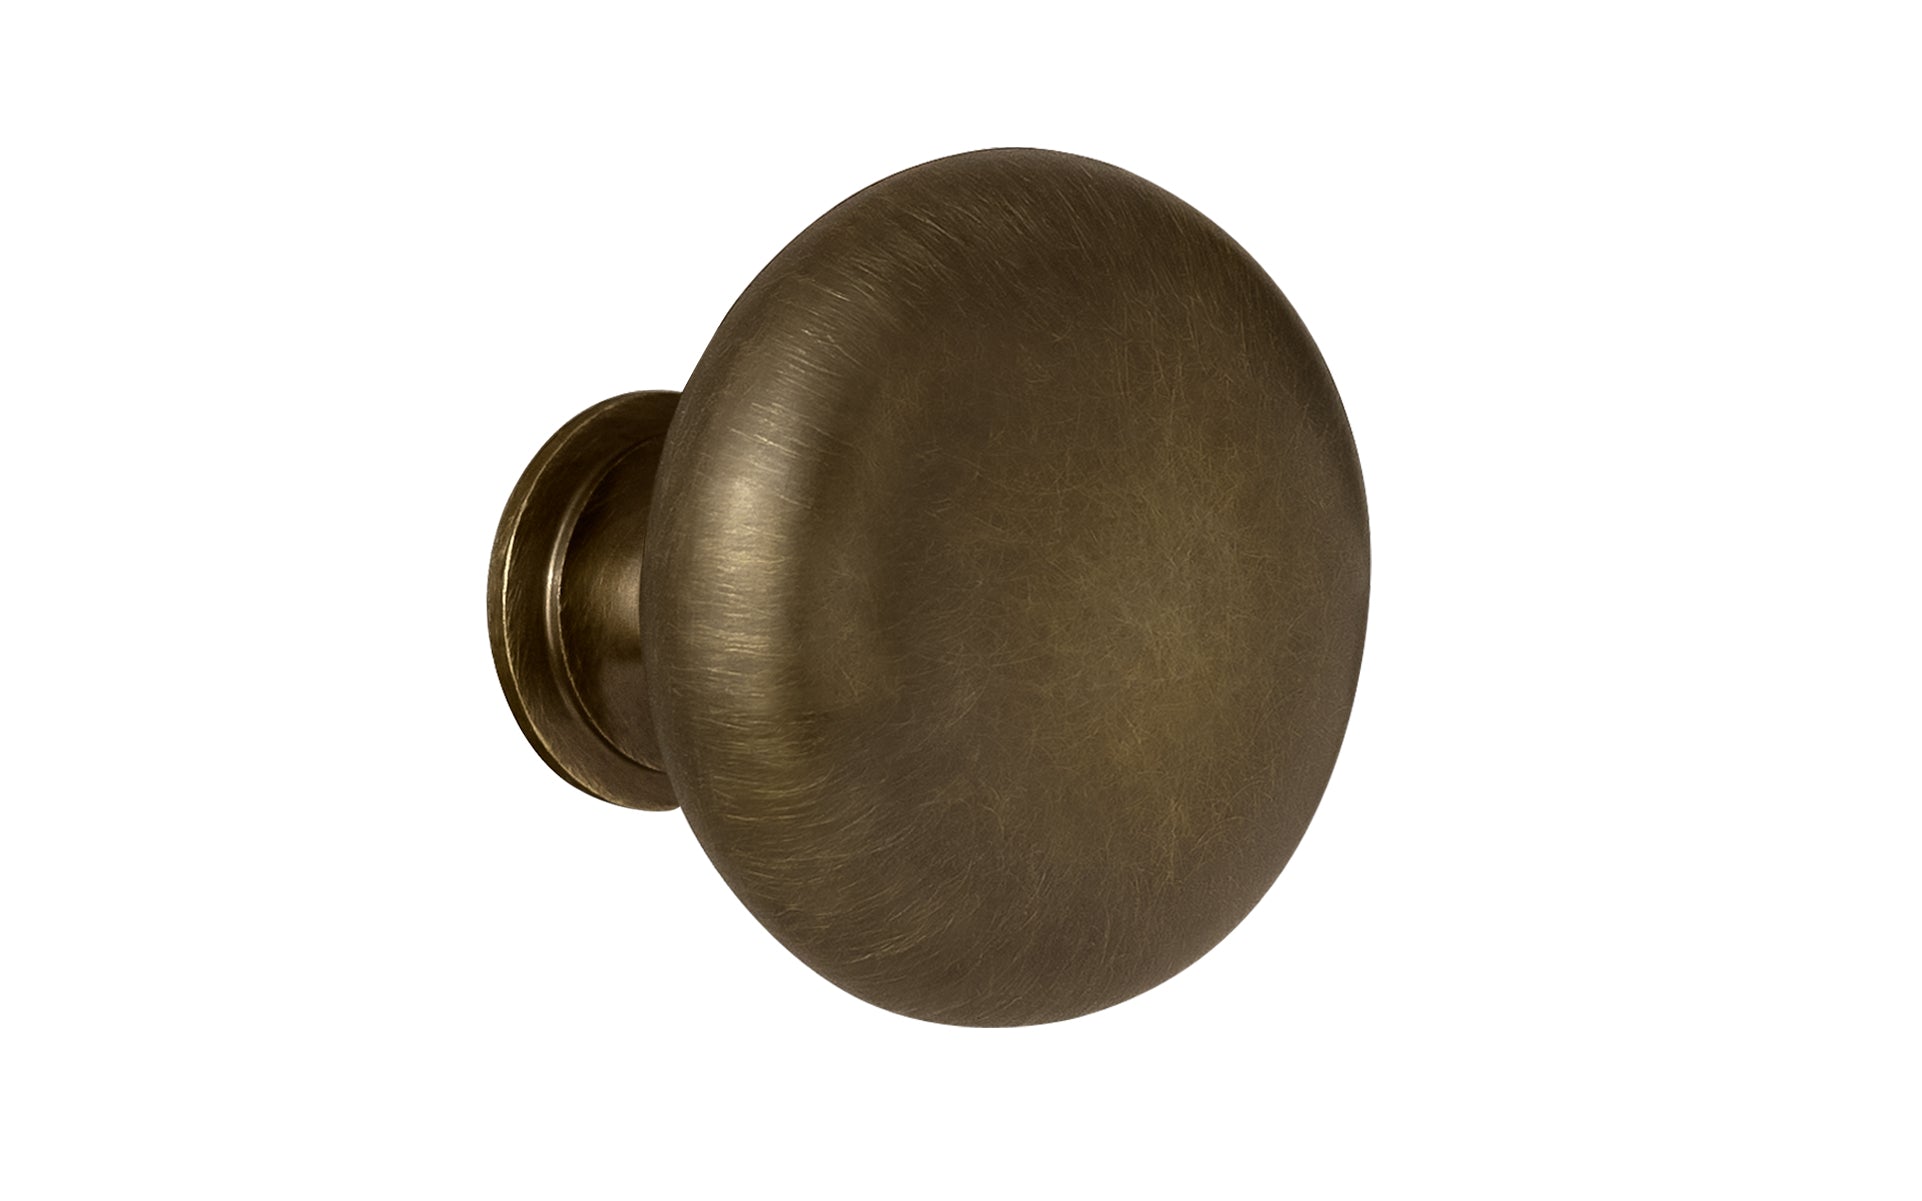 Vintage-style Hardware · Traditional & Classic 1-1/2" Diameter Brass Knob with an Antique Brass Finish. Made of high quality brass, this stylish round cabinet knob has a smooth look & feel on a pedestal shaped base. Works great in kitchens, bathrooms, on furniture, cabinets, drawers. Authentic reproduction hardware.